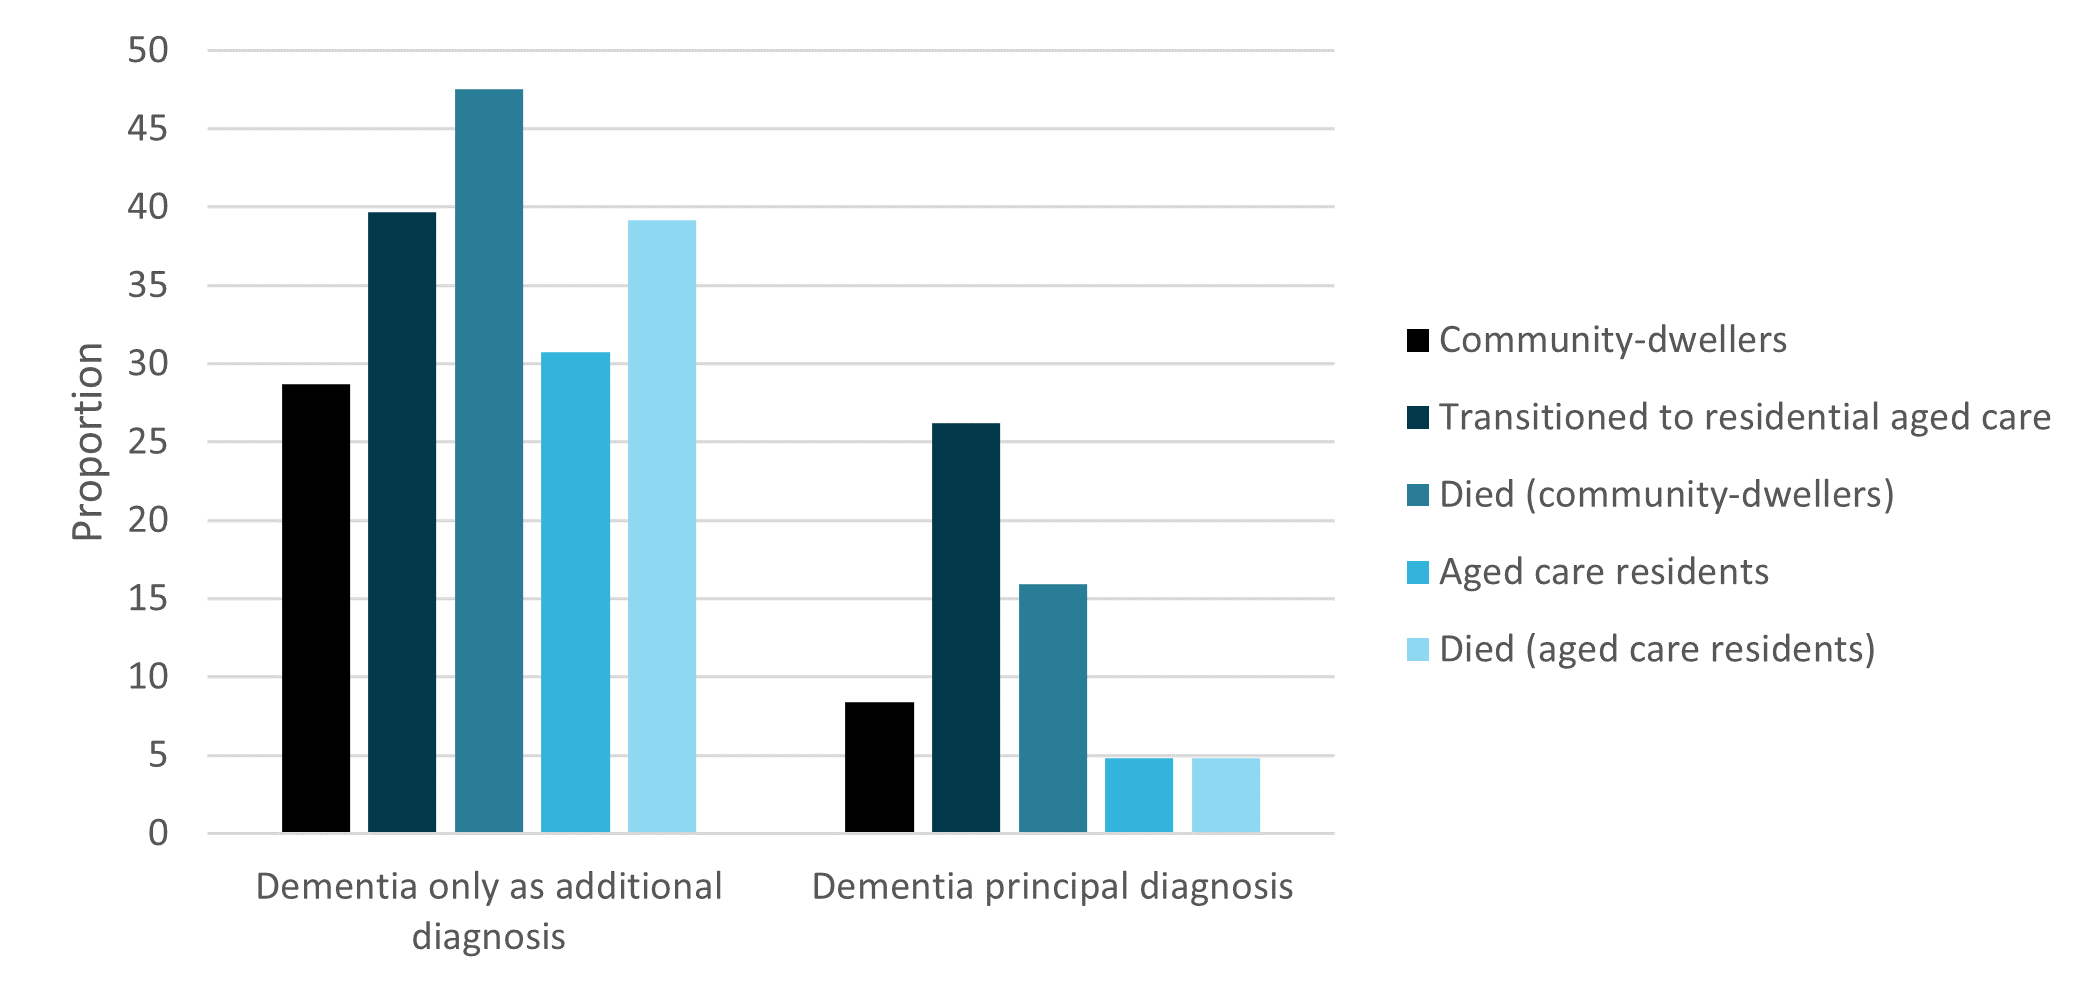 The figure is a bar chart and shows that having dementia as an additional diagnosis was more common than having dementia as a principal diagnosis. People living with dementia who transitioned to residential aged care were more likely to be hospitalised with a principal diagnosis of dementia compared to community-dwellers, aged care residents and people who died during their hospitalisation or within 7-days of discharge.